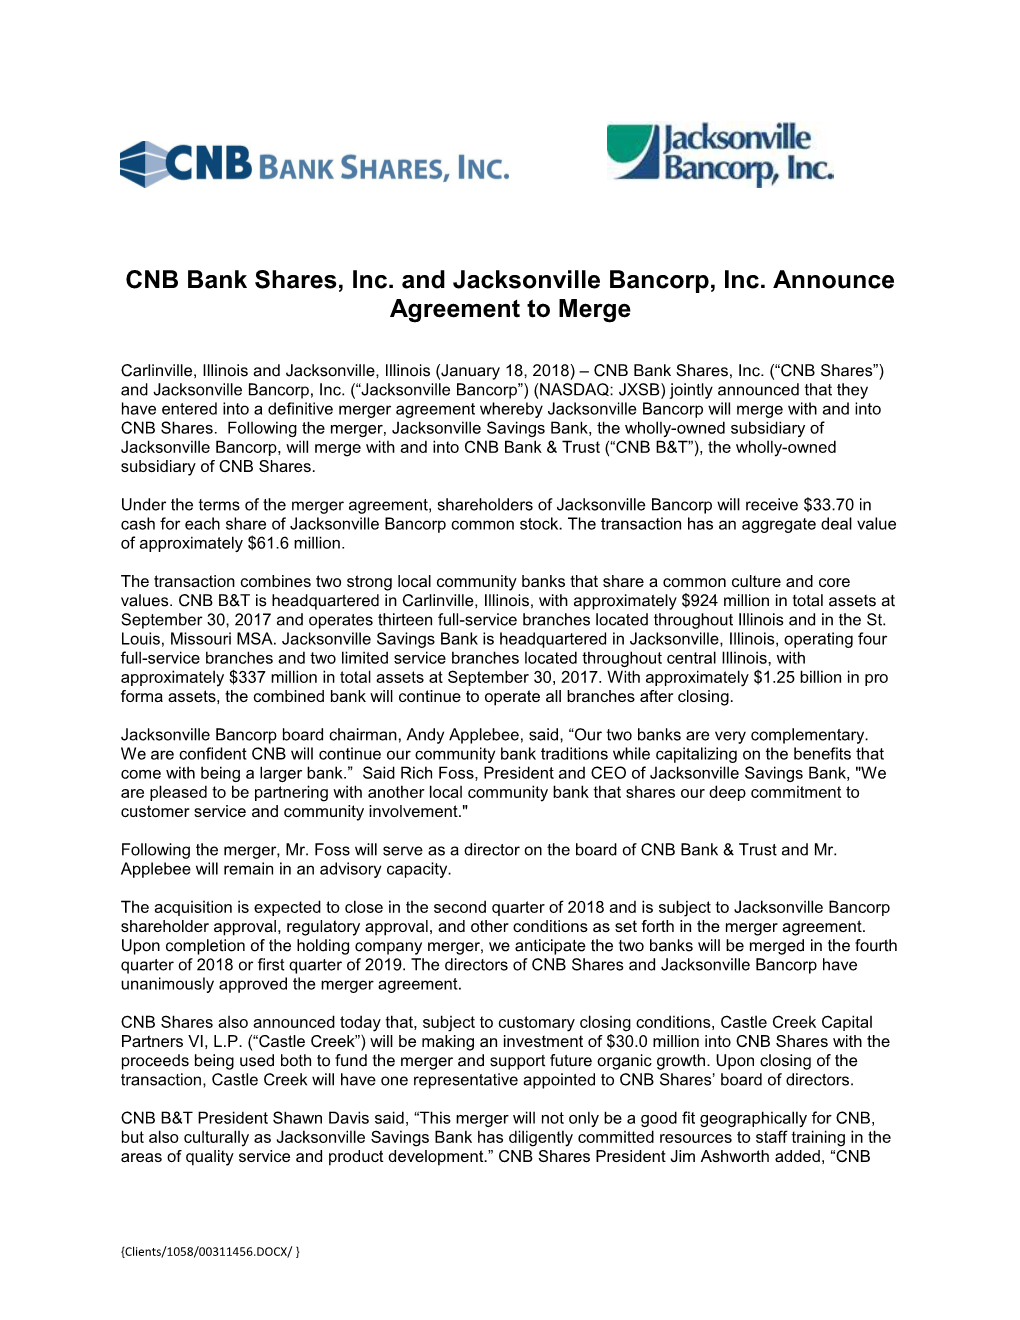 Press Release Re: Merger Announcement (Project Fit) (00311456;1)